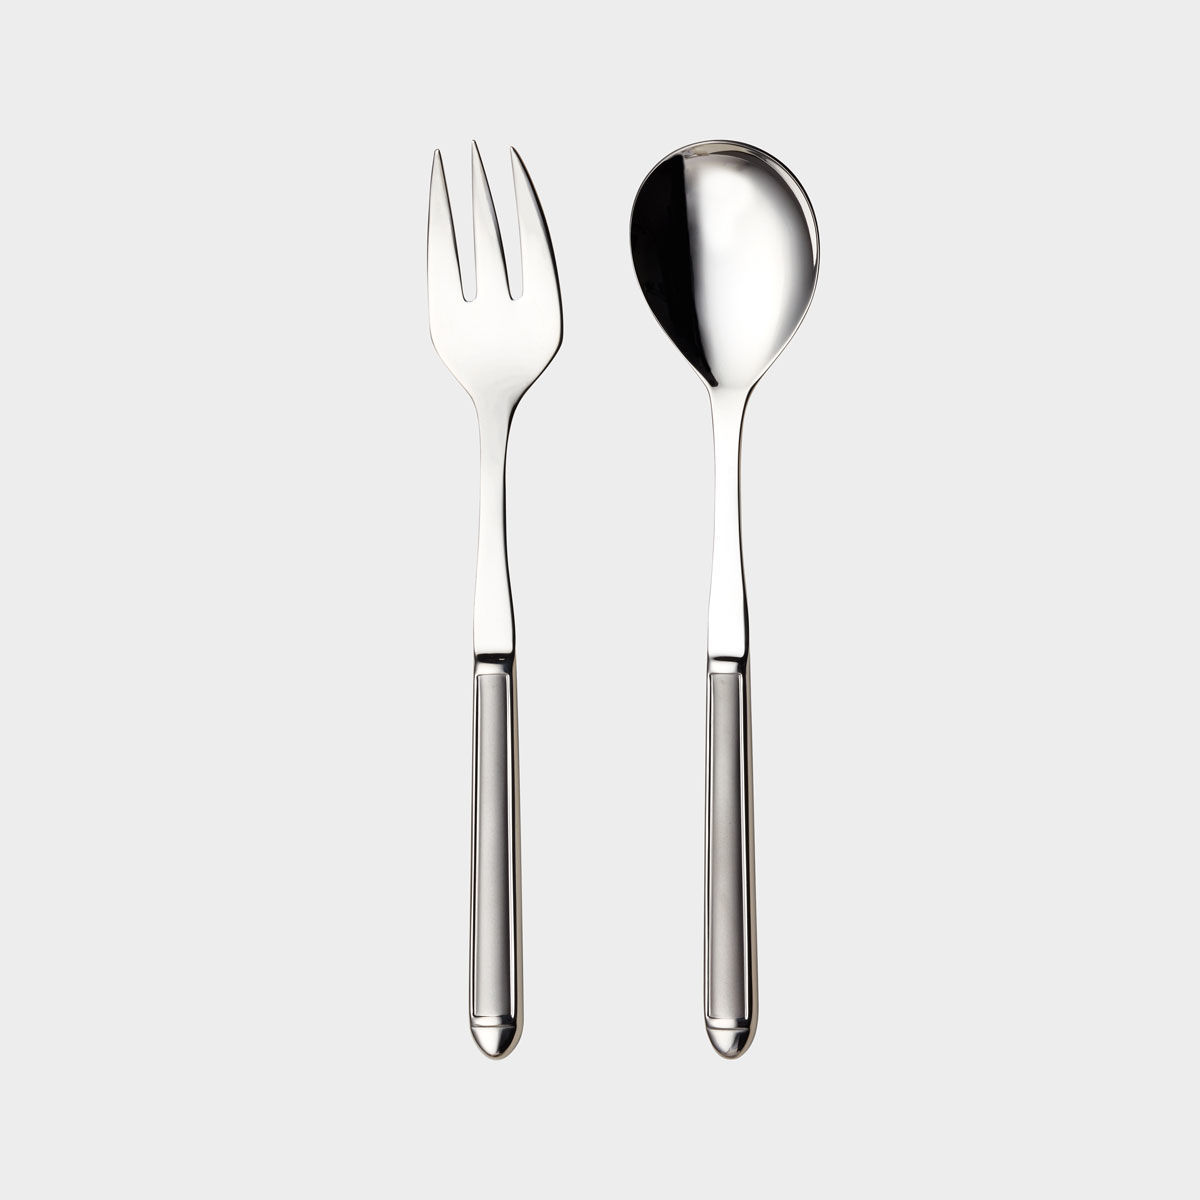 Nora serving set product image